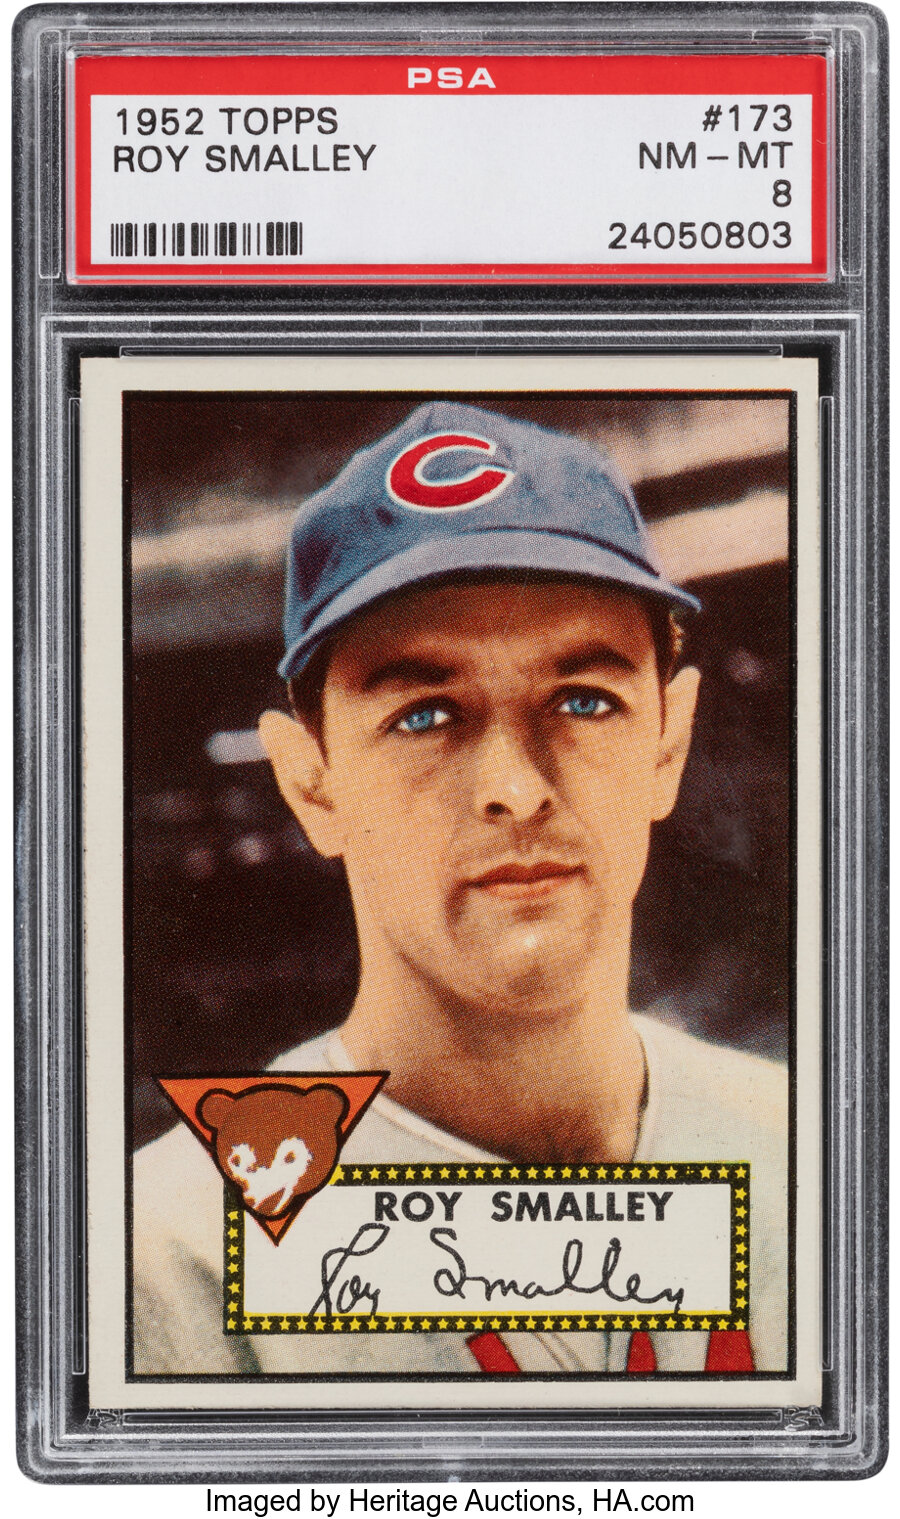 1952 Topps Roy Smalley #173 PSA NM-MT 8 - Only One Higher